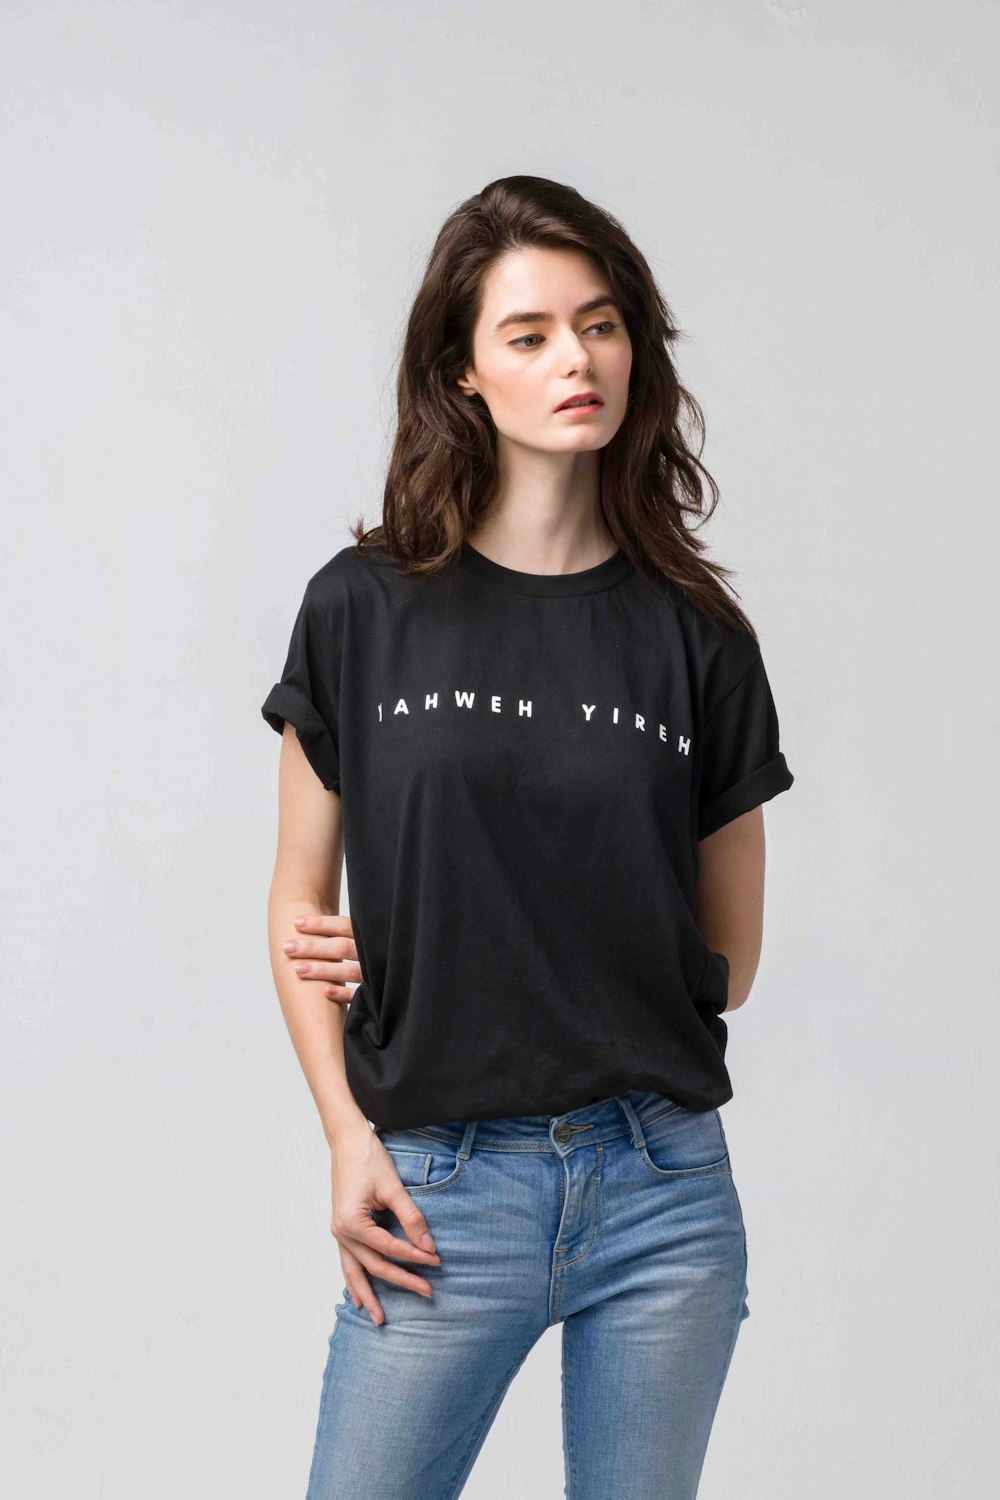 1000+ Woman T Shirt Pictures | Download Free Images on Unsplash